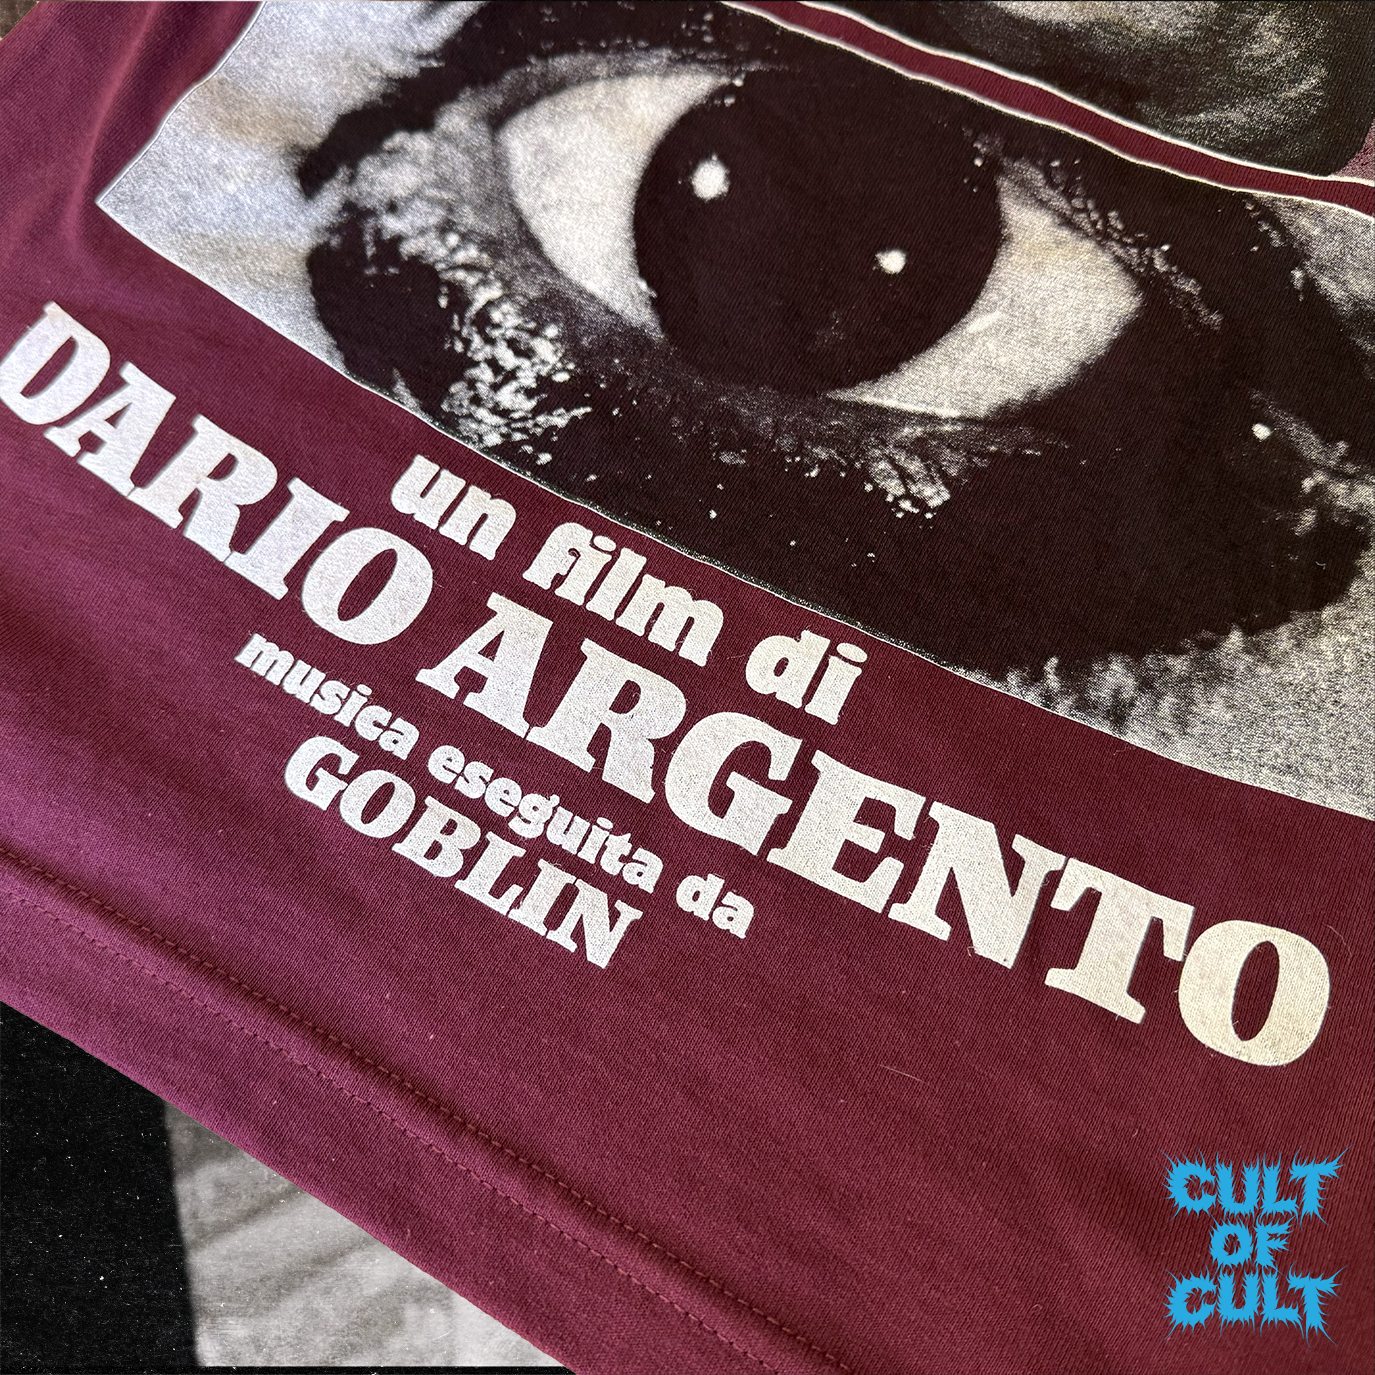 A zoomed in detailed shot of the Deep Red Profondo Rosso 1975 short sleeve shirt that reads Dario Argento